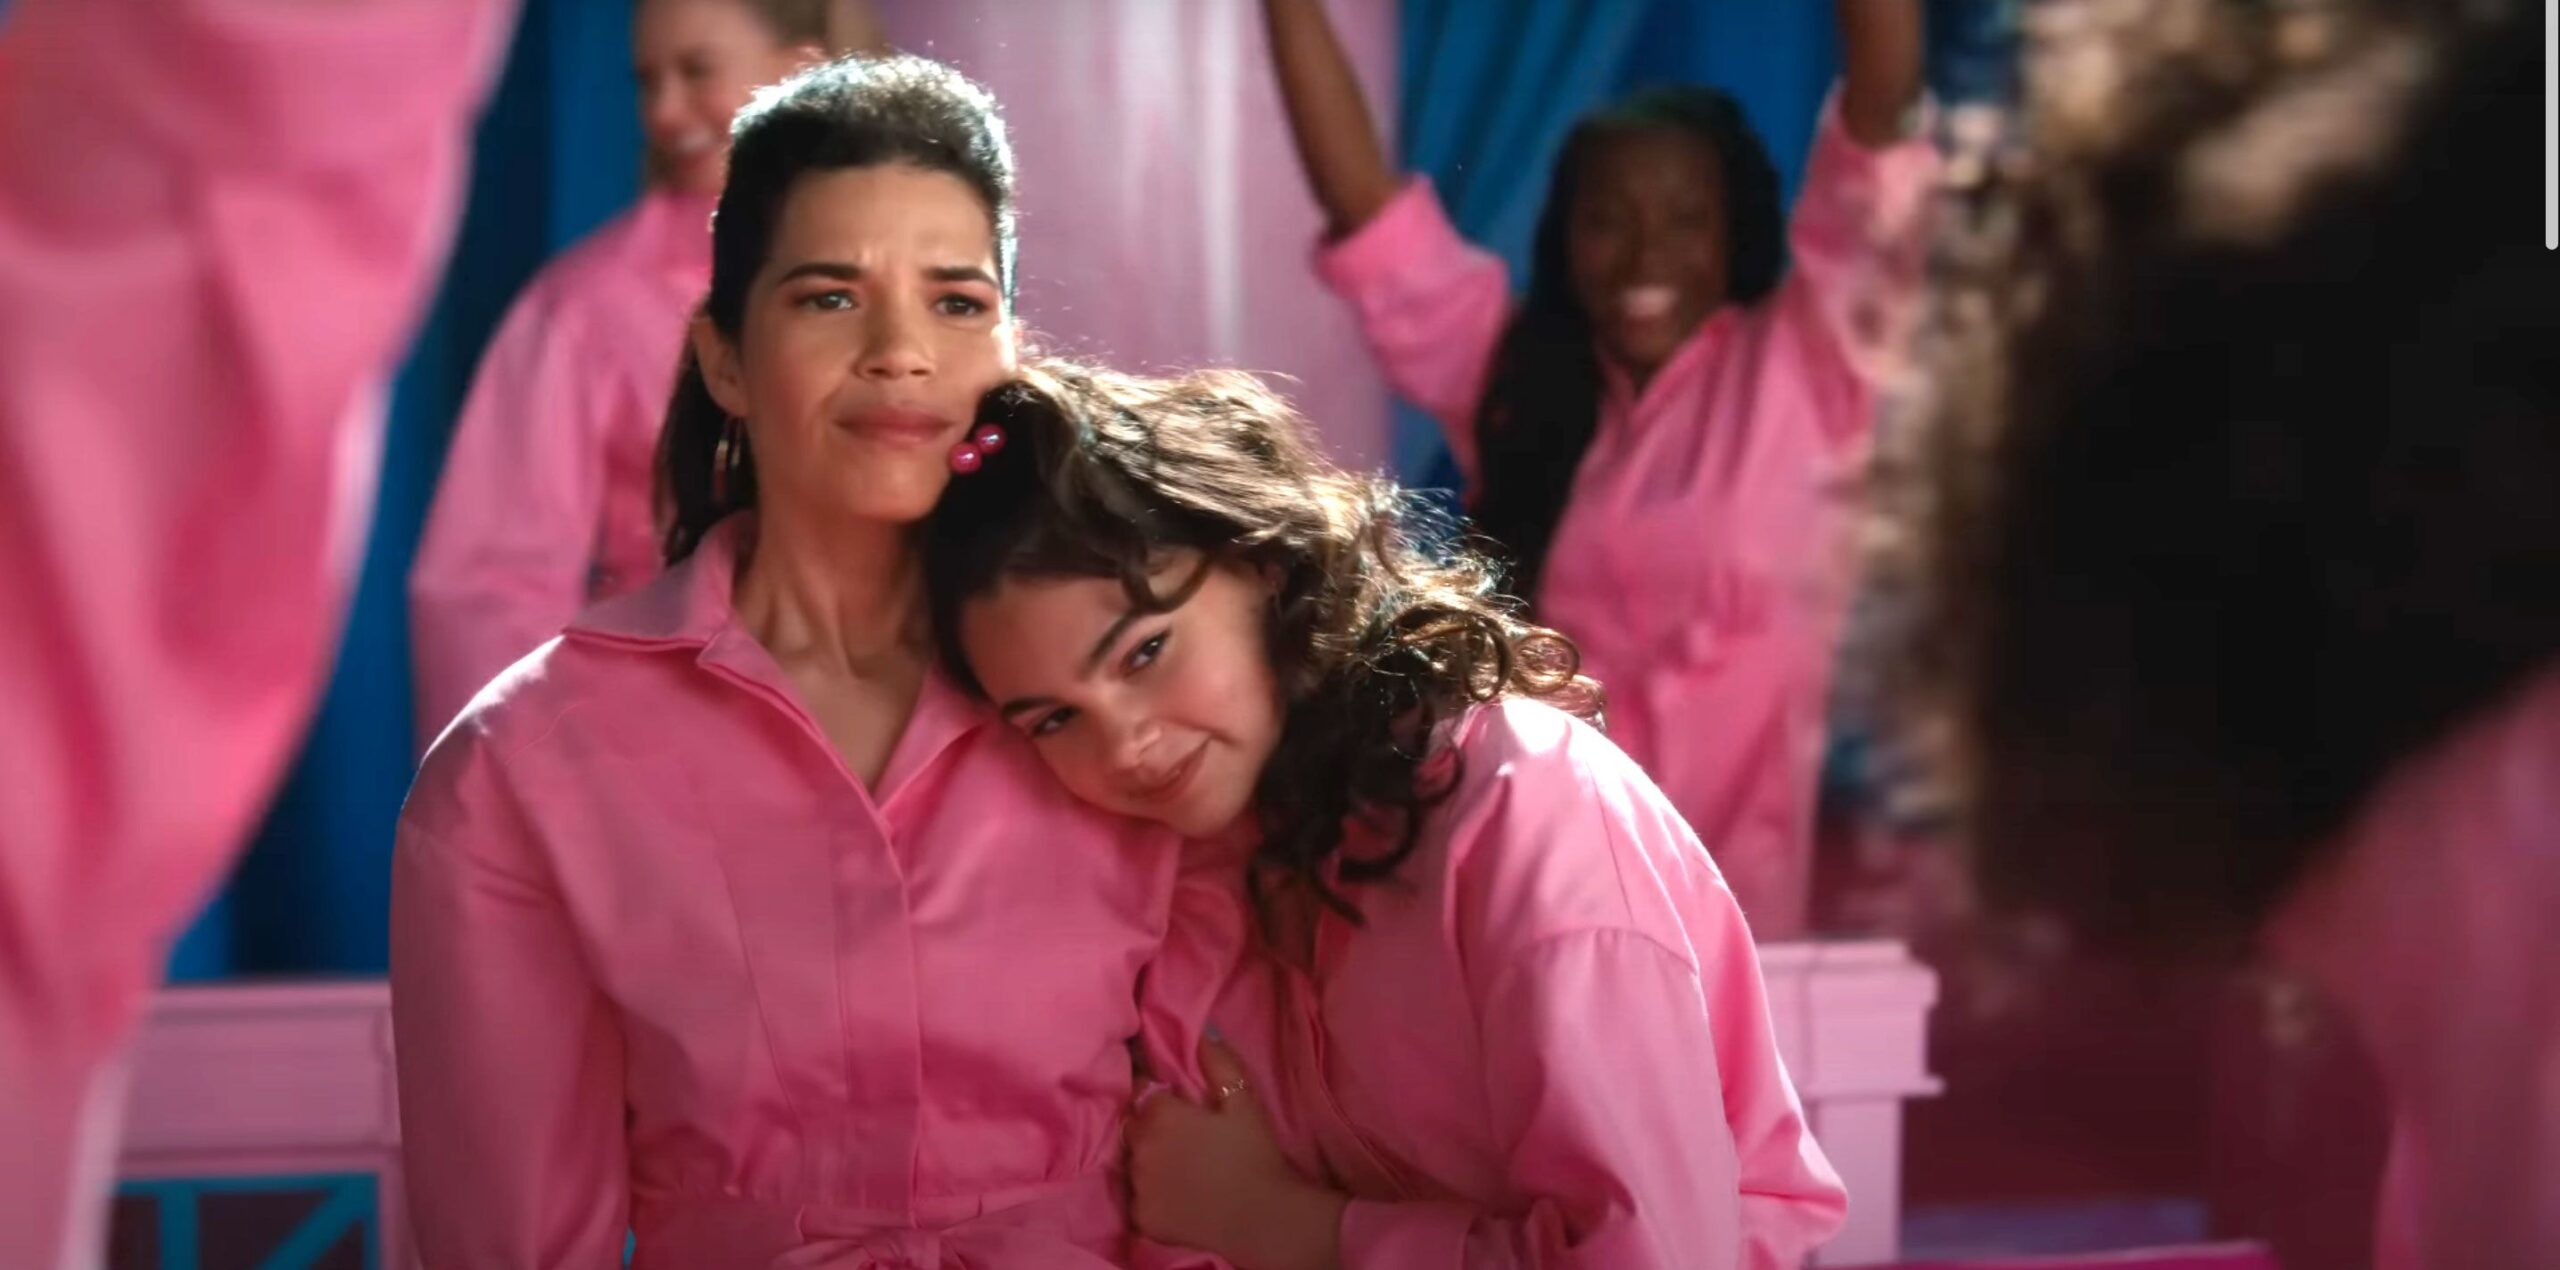 America Ferrera Powerful Barbie Message Reaches Young Hearts